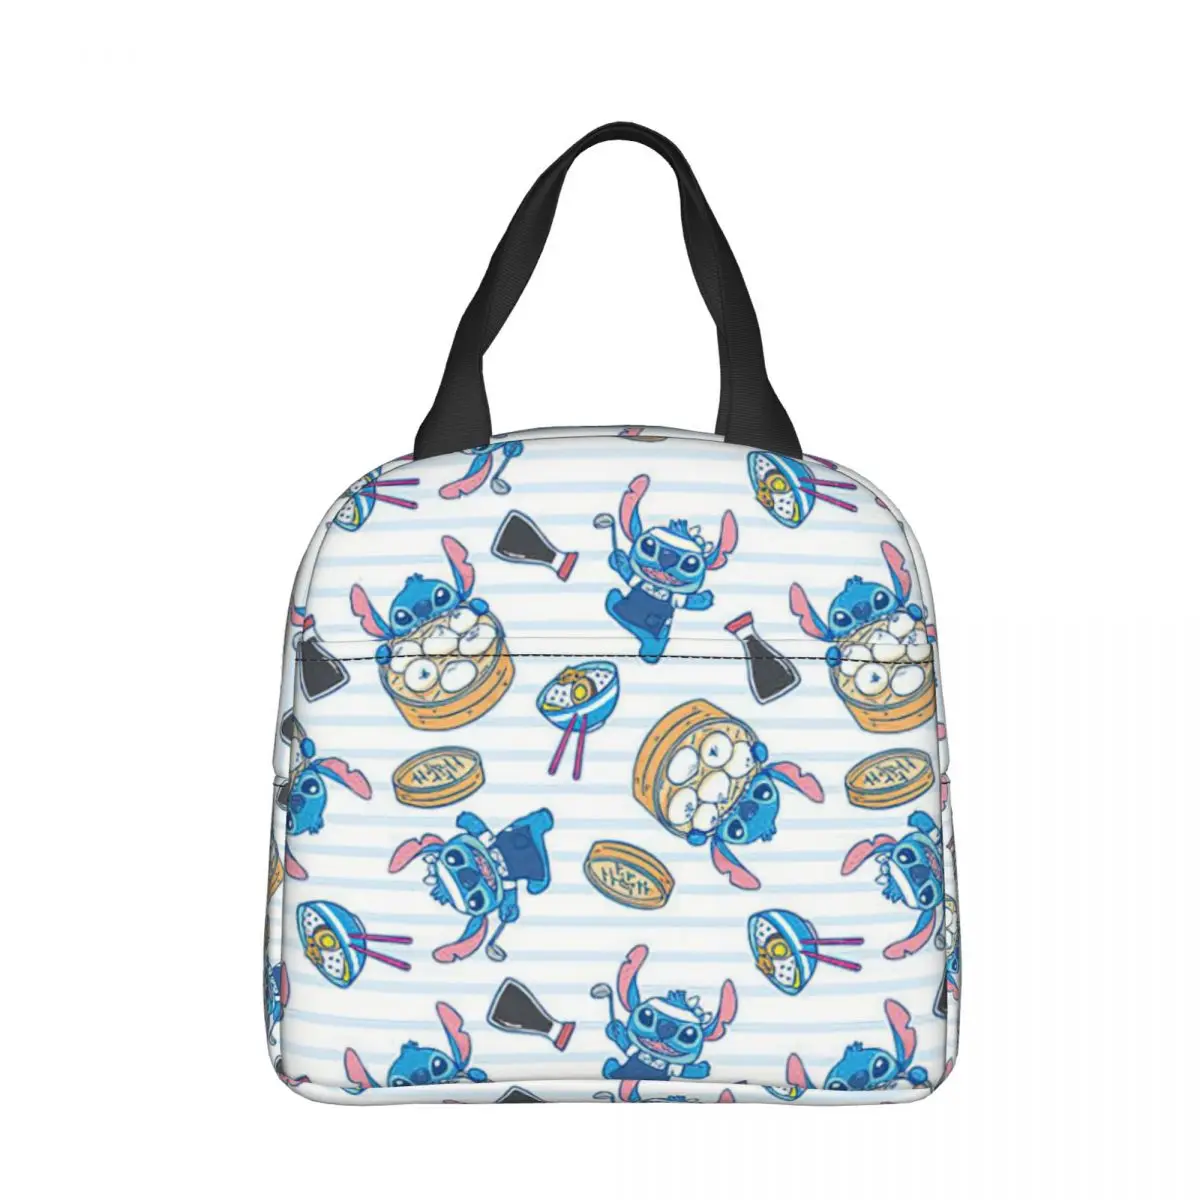 

Disney Lilo & Stitch Food Insulated Lunch Bags Thermal Bag Reusable Cartoon Leakproof Tote Lunch Box Food Storage Bags Beach